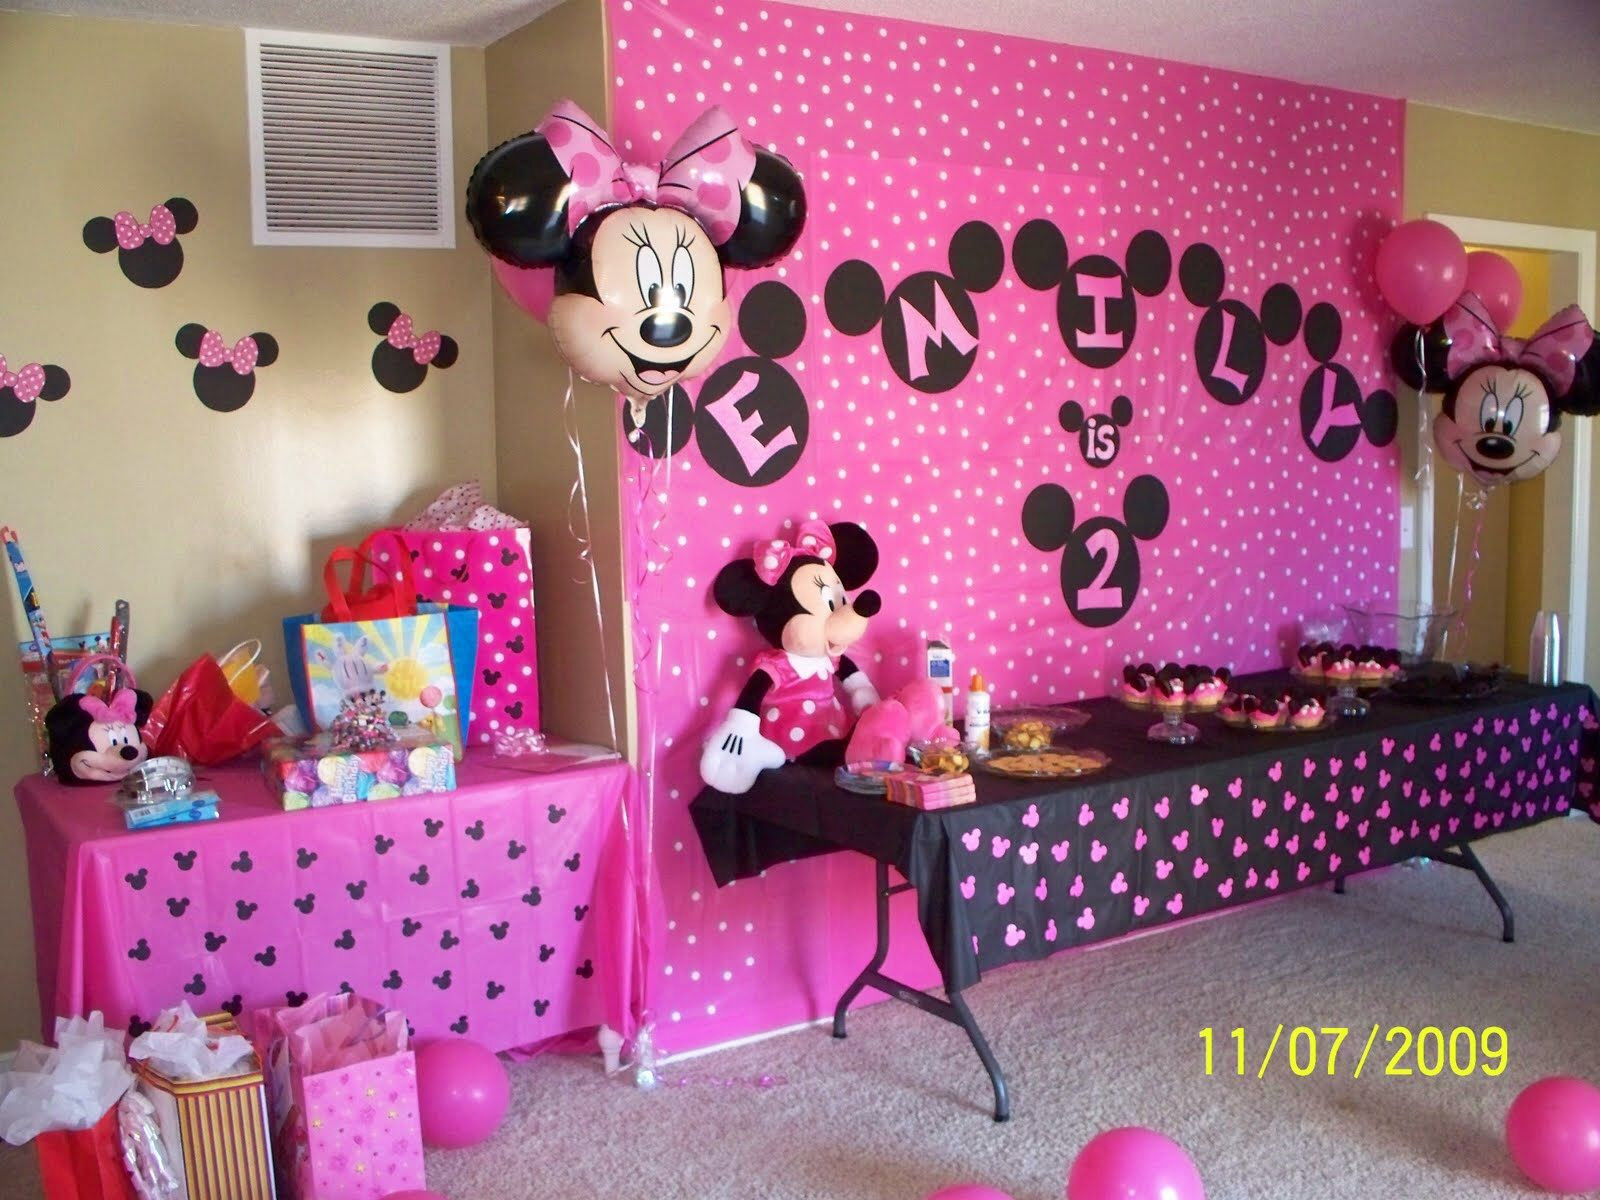 DIY Minnie Mouse Party Decorations
 Homemade decorations Homemade stuff in 2019